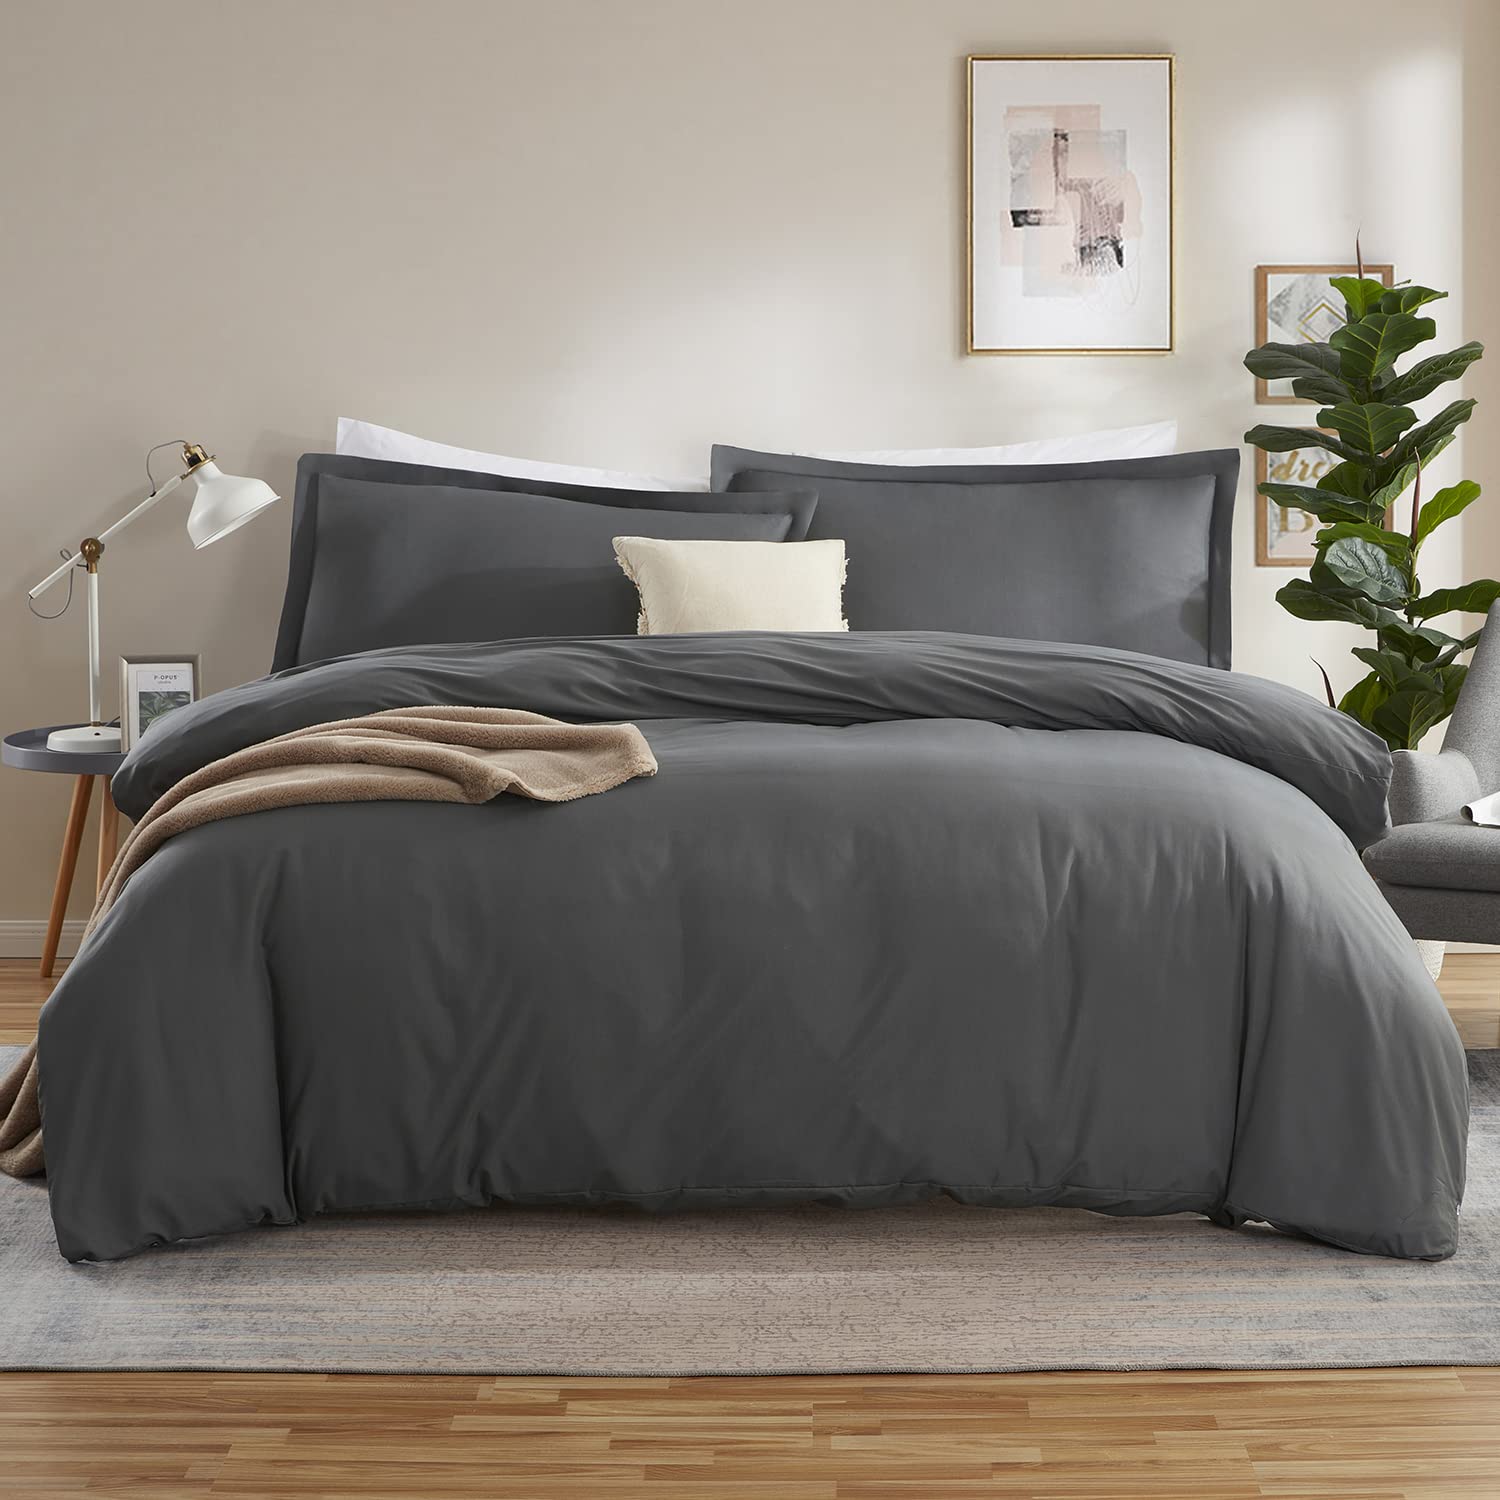 Book Cover Nestl Grey Duvet Cover Full Size - Soft Full Size Duvet Cover Set, 3 Piece Double Brushed Full Duvet Covers with Button Closure, 1 Full Duvet Cover 80x90 inches and 2 Pillow Shams Grey Full